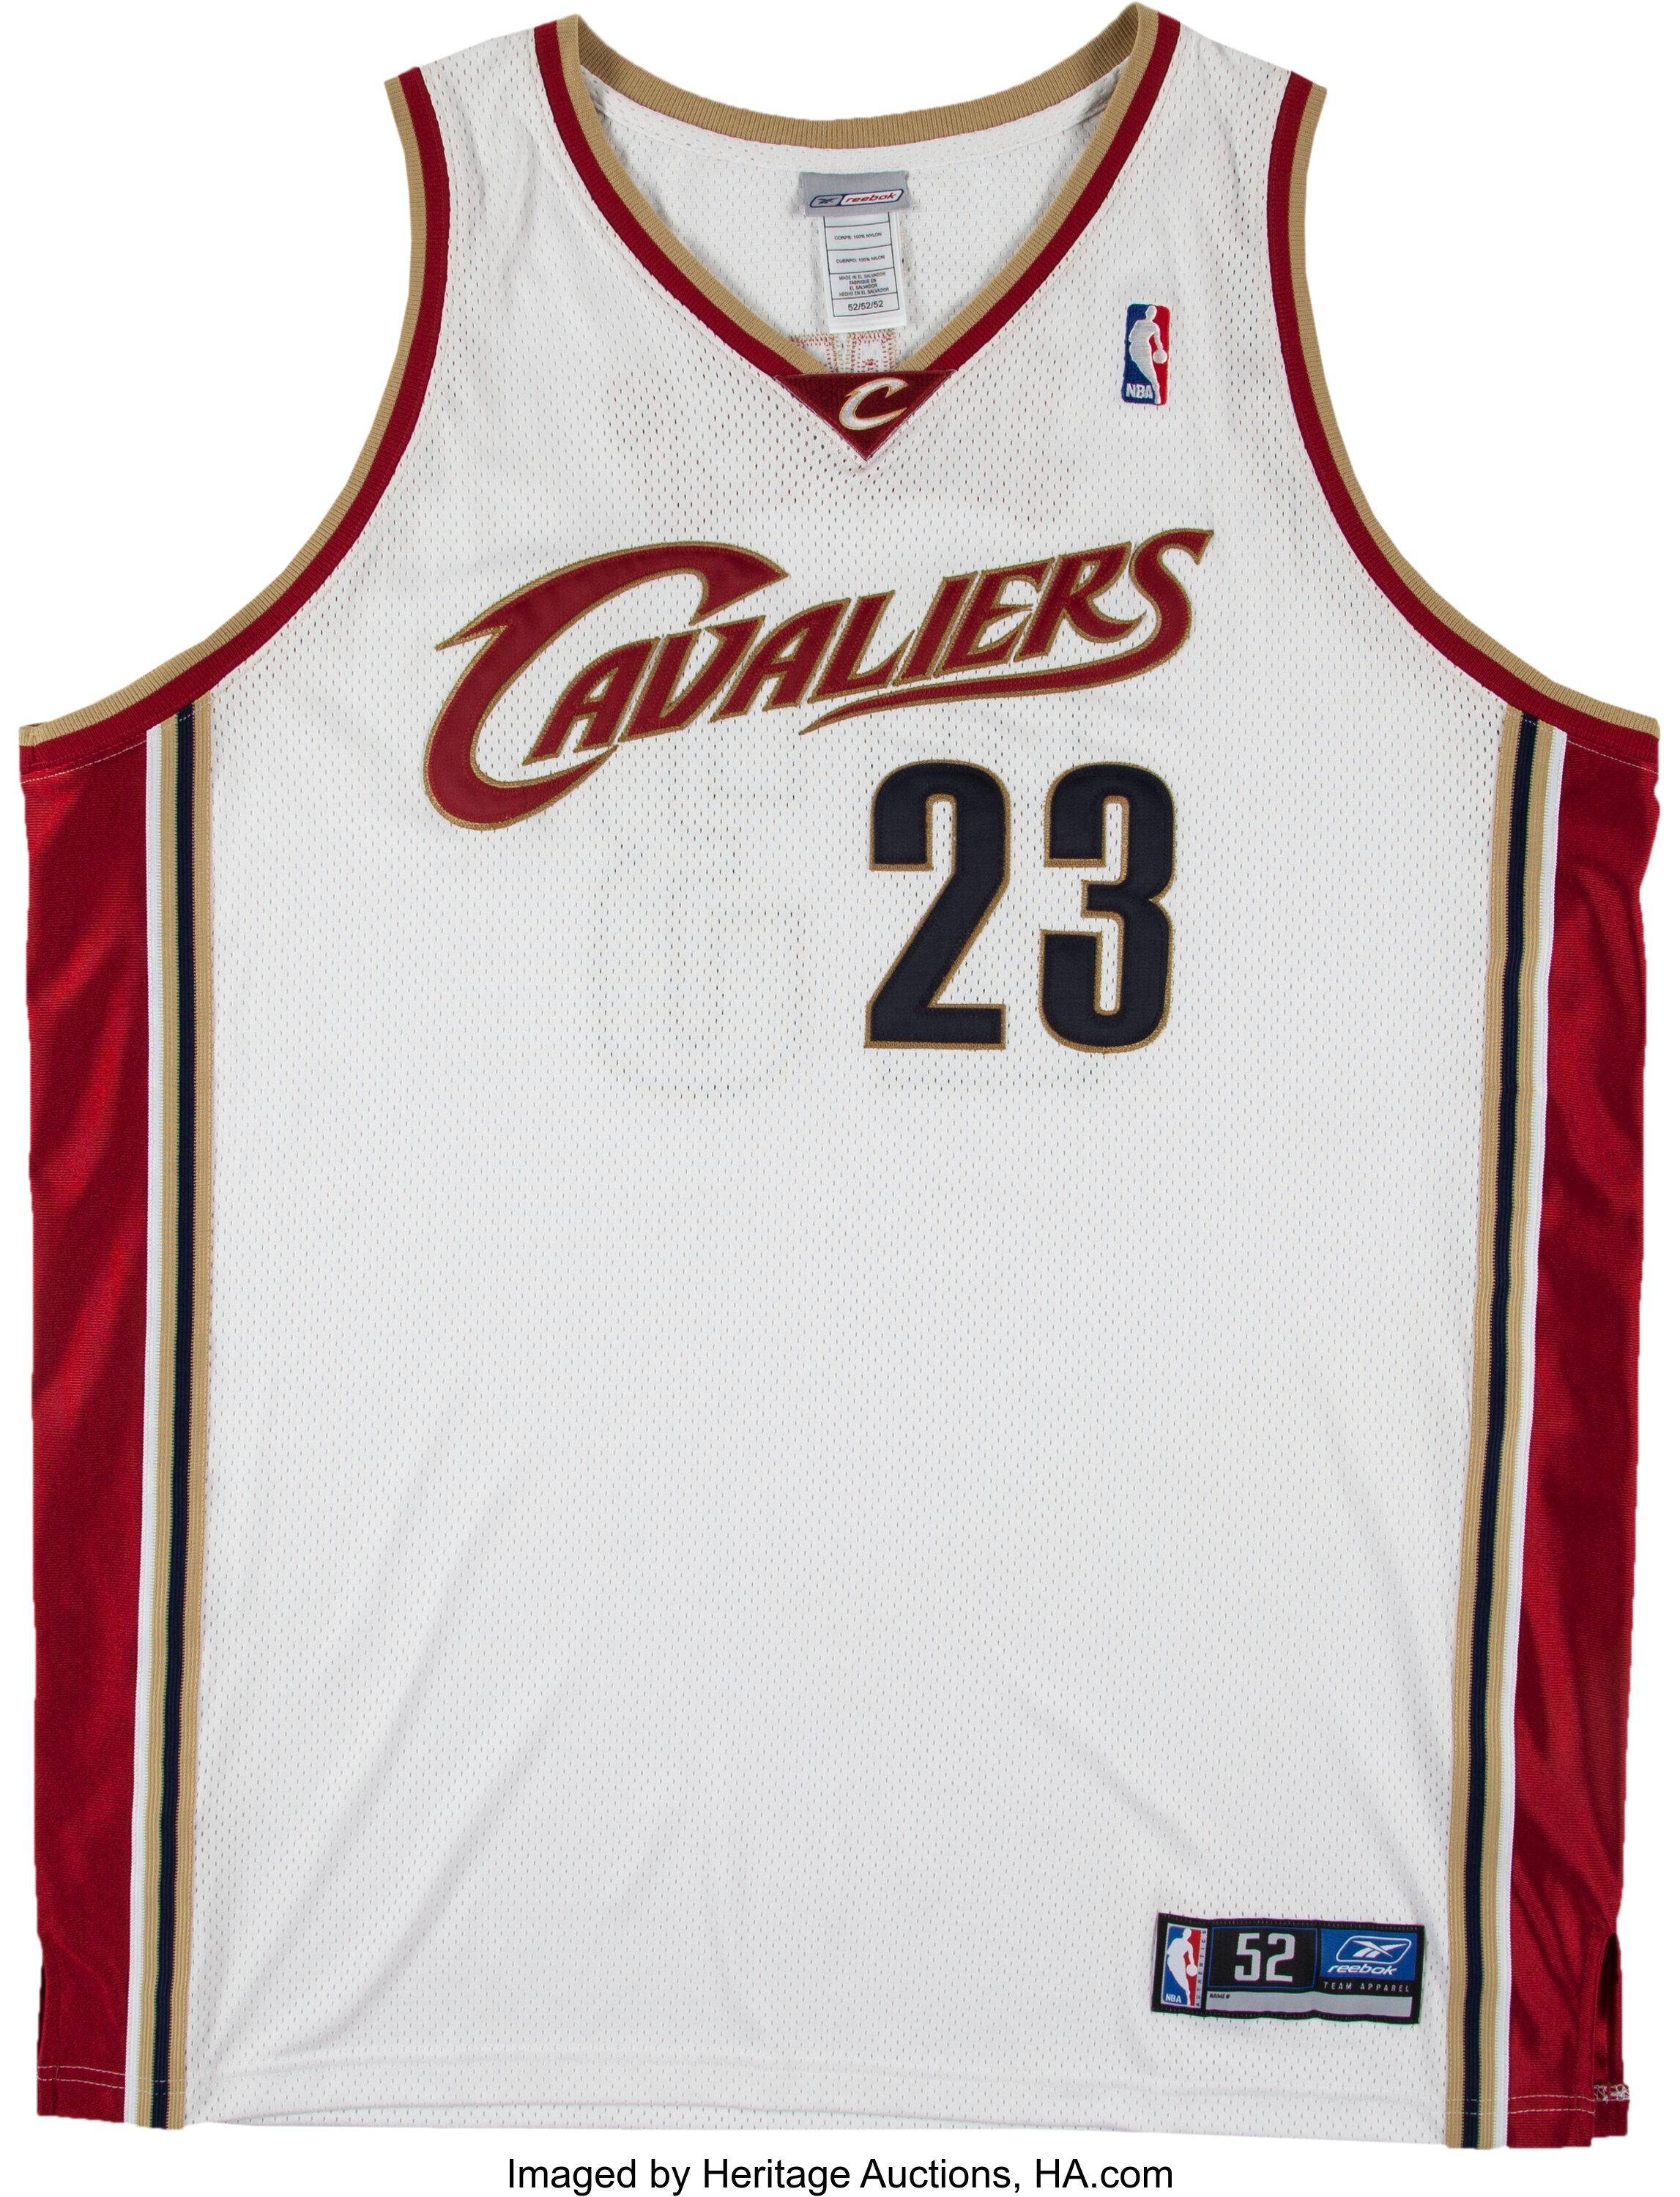 Cavaliers LeBron James Authentic Signed White Framed Jersey UDA #SHO44 –  Super Sports Center